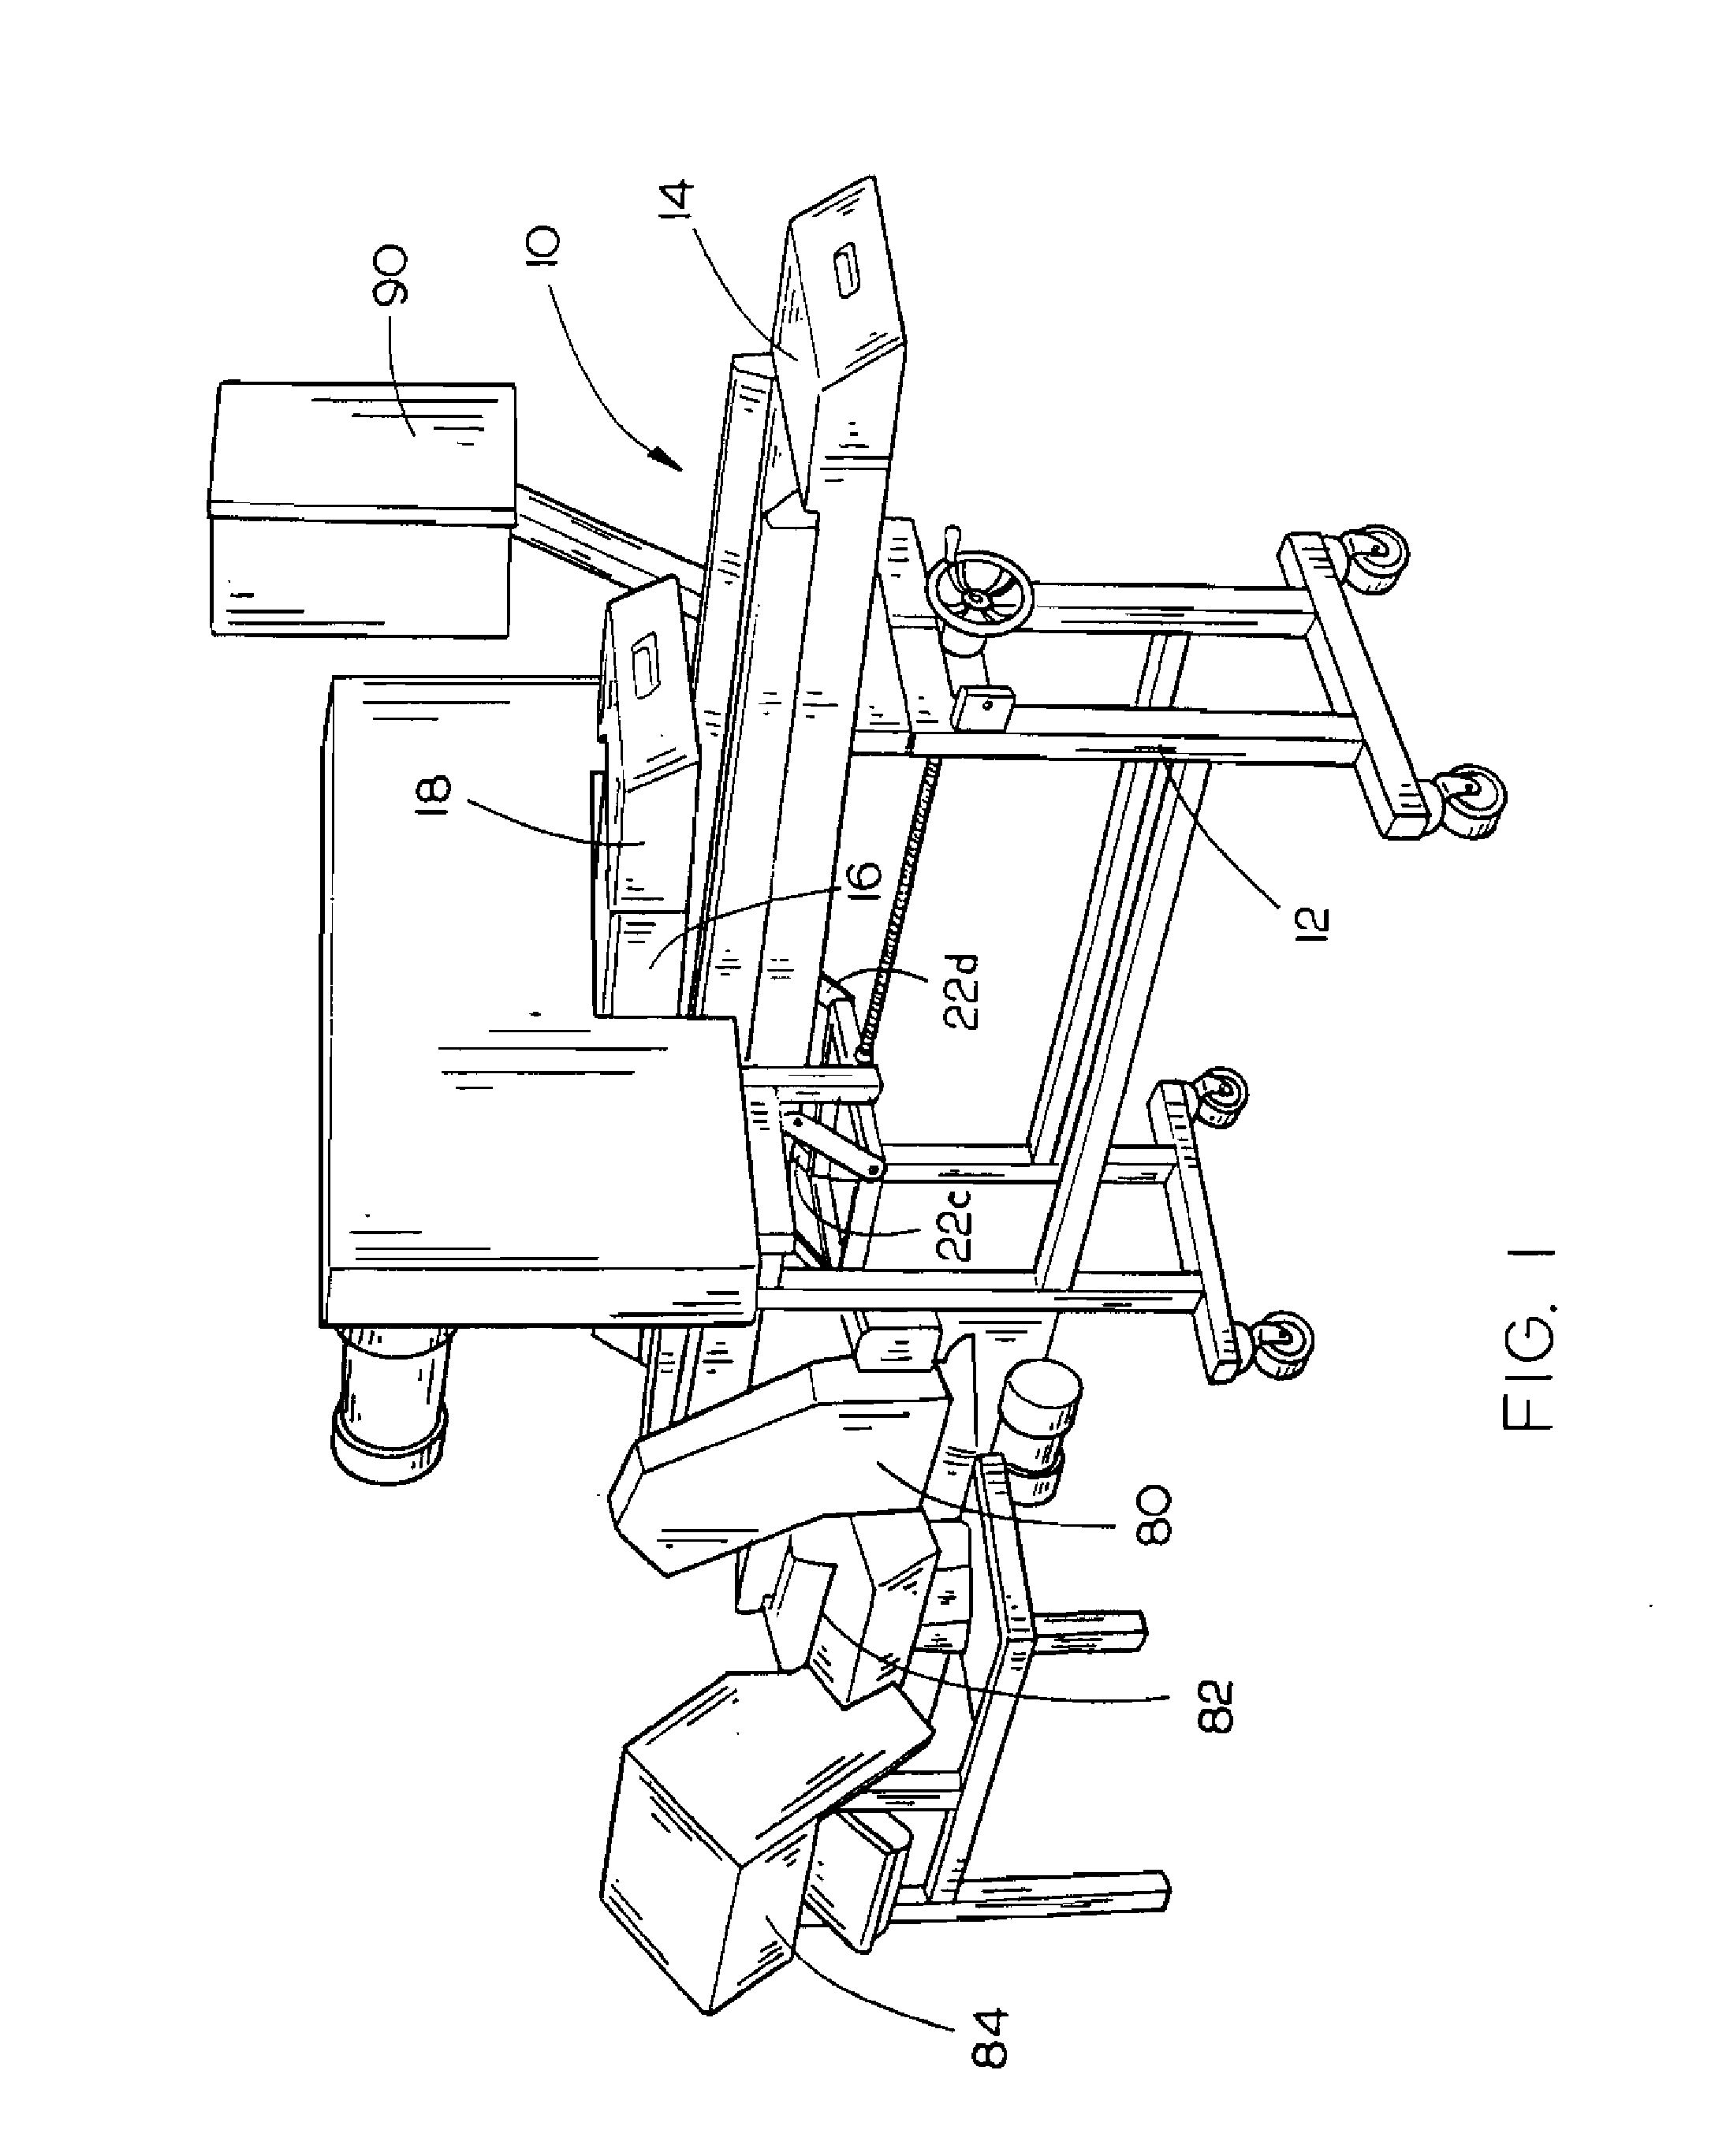 Horizontal Meat Slicer with Bandsaw Blade